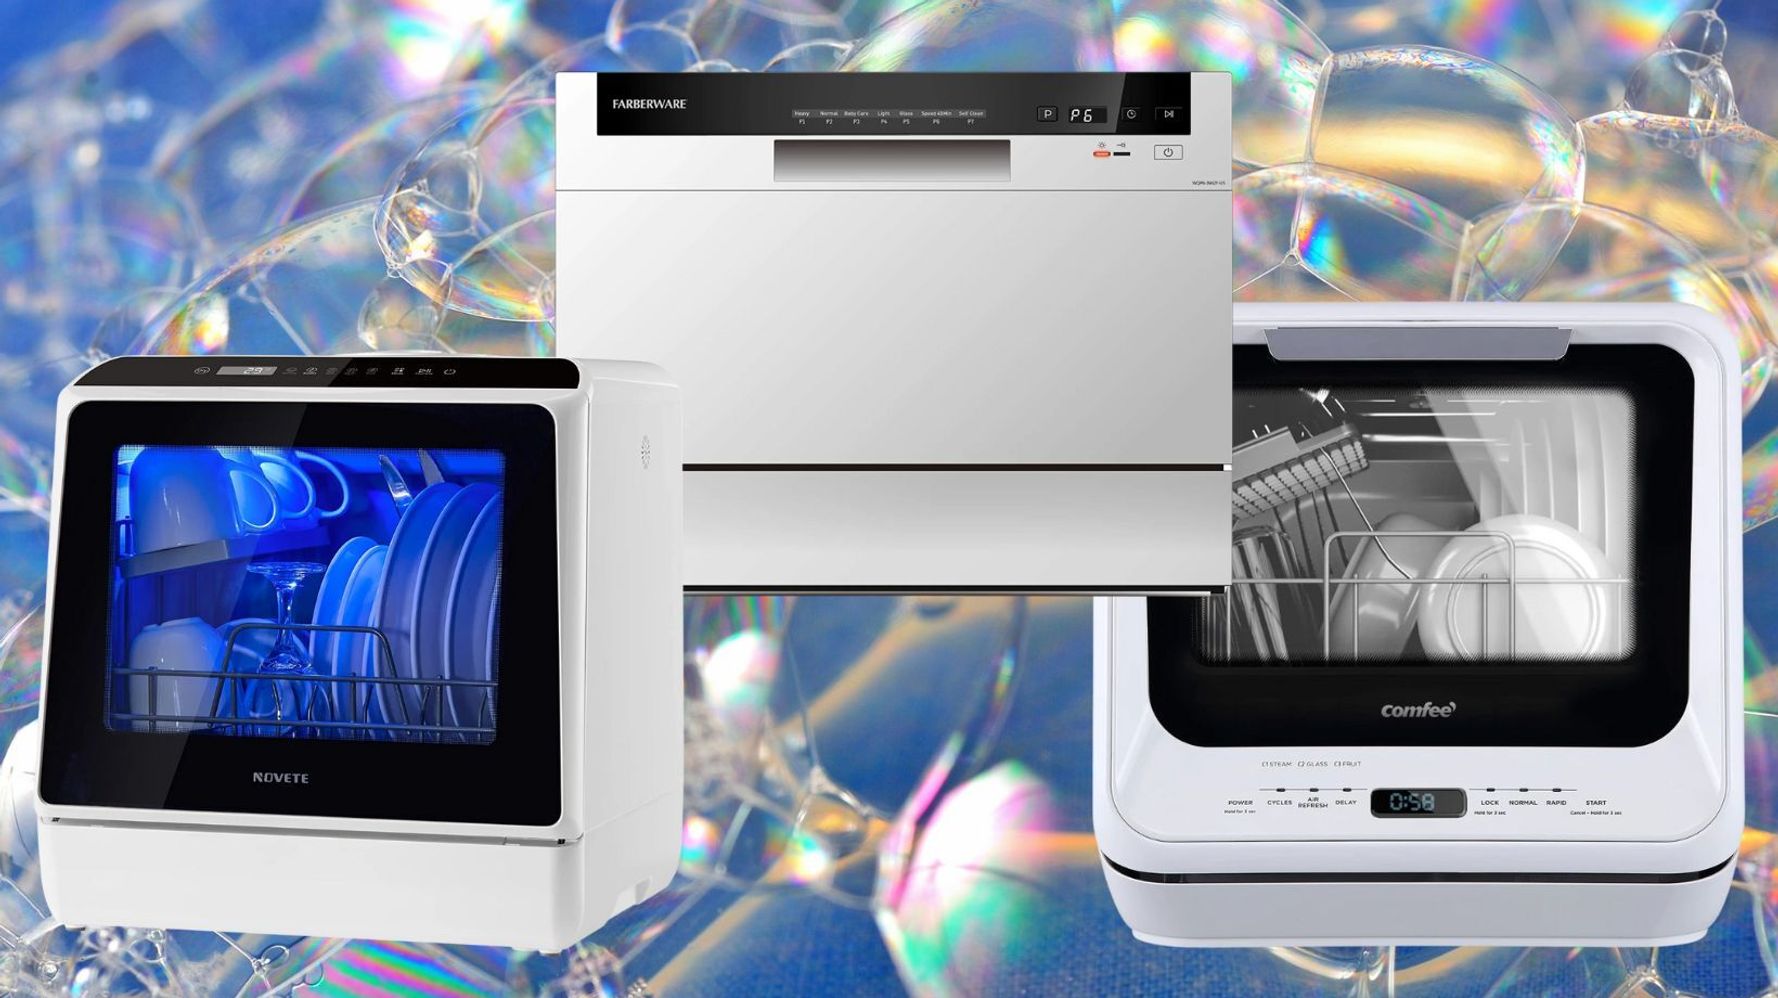 The Best Countertop Dishwashers of 2023